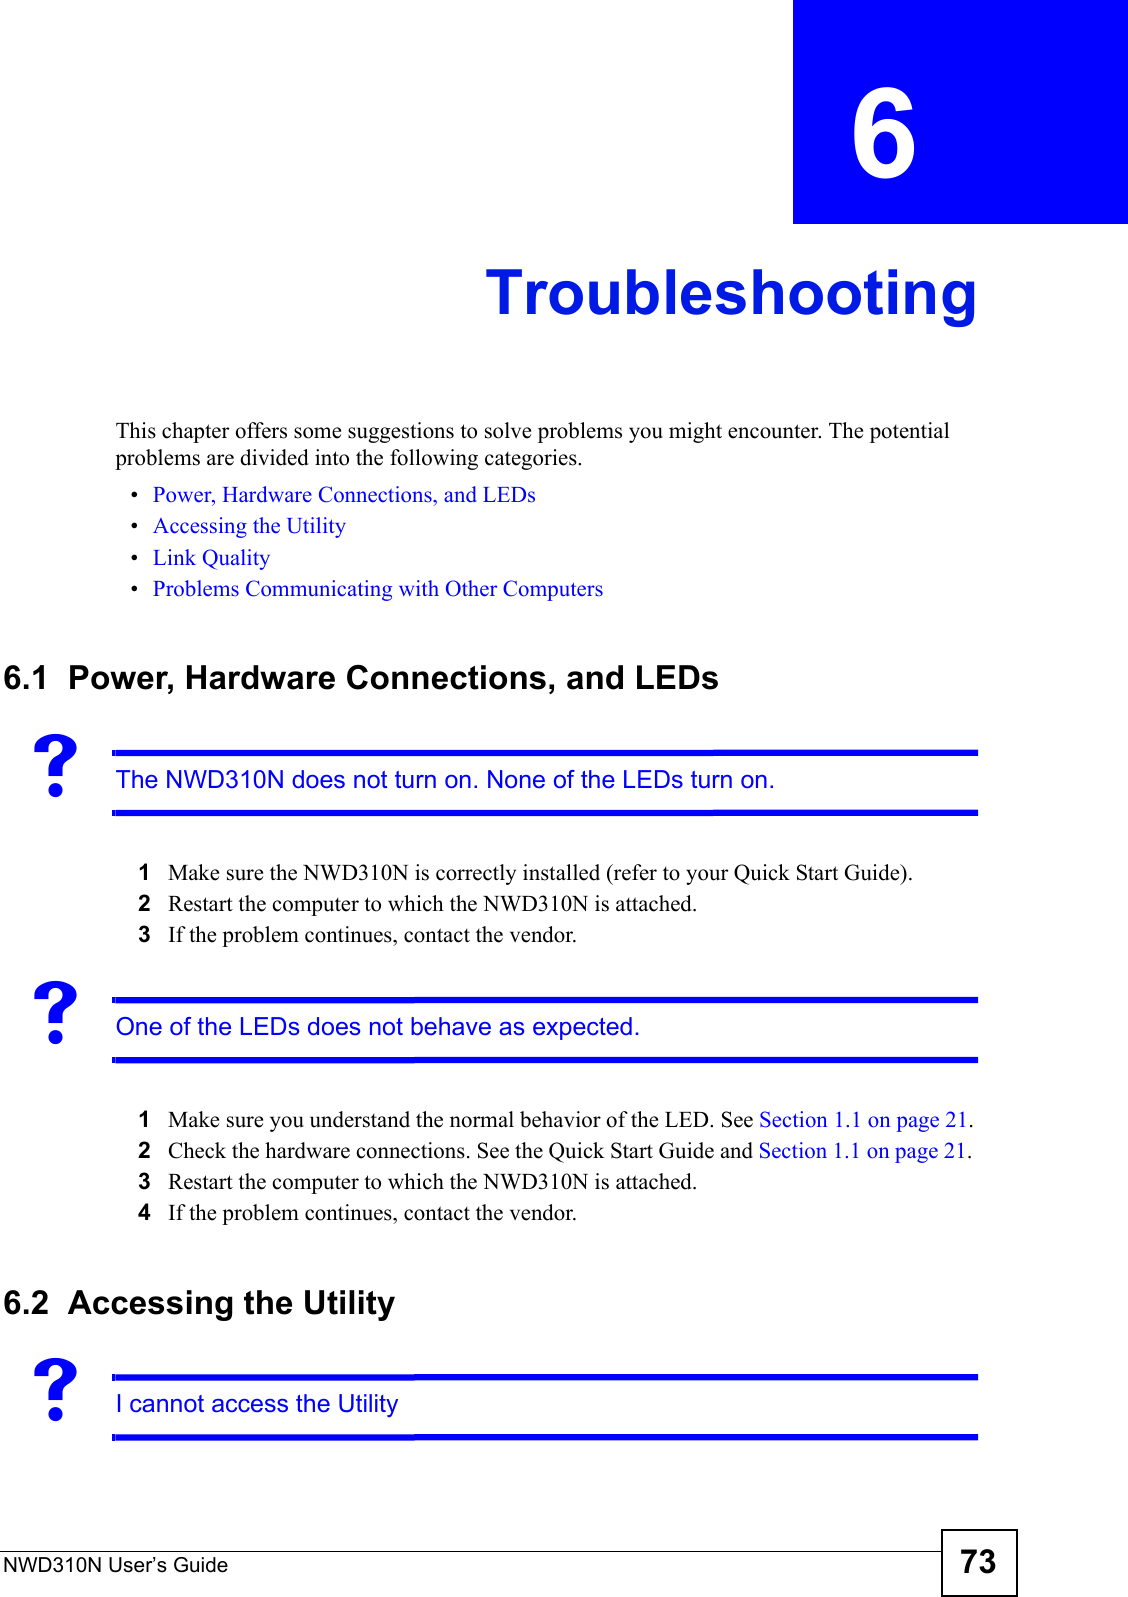 NWD310N User’s Guide 73CHAPTER  6 TroubleshootingThis chapter offers some suggestions to solve problems you might encounter. The potential problems are divided into the following categories. •Power, Hardware Connections, and LEDs•Accessing the Utility•Link Quality•Problems Communicating with Other Computers6.1  Power, Hardware Connections, and LEDsVThe NWD310N does not turn on. None of the LEDs turn on.1Make sure the NWD310N is correctly installed (refer to your Quick Start Guide).2Restart the computer to which the NWD310N is attached.3If the problem continues, contact the vendor.VOne of the LEDs does not behave as expected.1Make sure you understand the normal behavior of the LED. See Section 1.1 on page 21.2Check the hardware connections. See the Quick Start Guide and Section 1.1 on page 21. 3Restart the computer to which the NWD310N is attached.4If the problem continues, contact the vendor.6.2  Accessing the UtilityVI cannot access the Utility